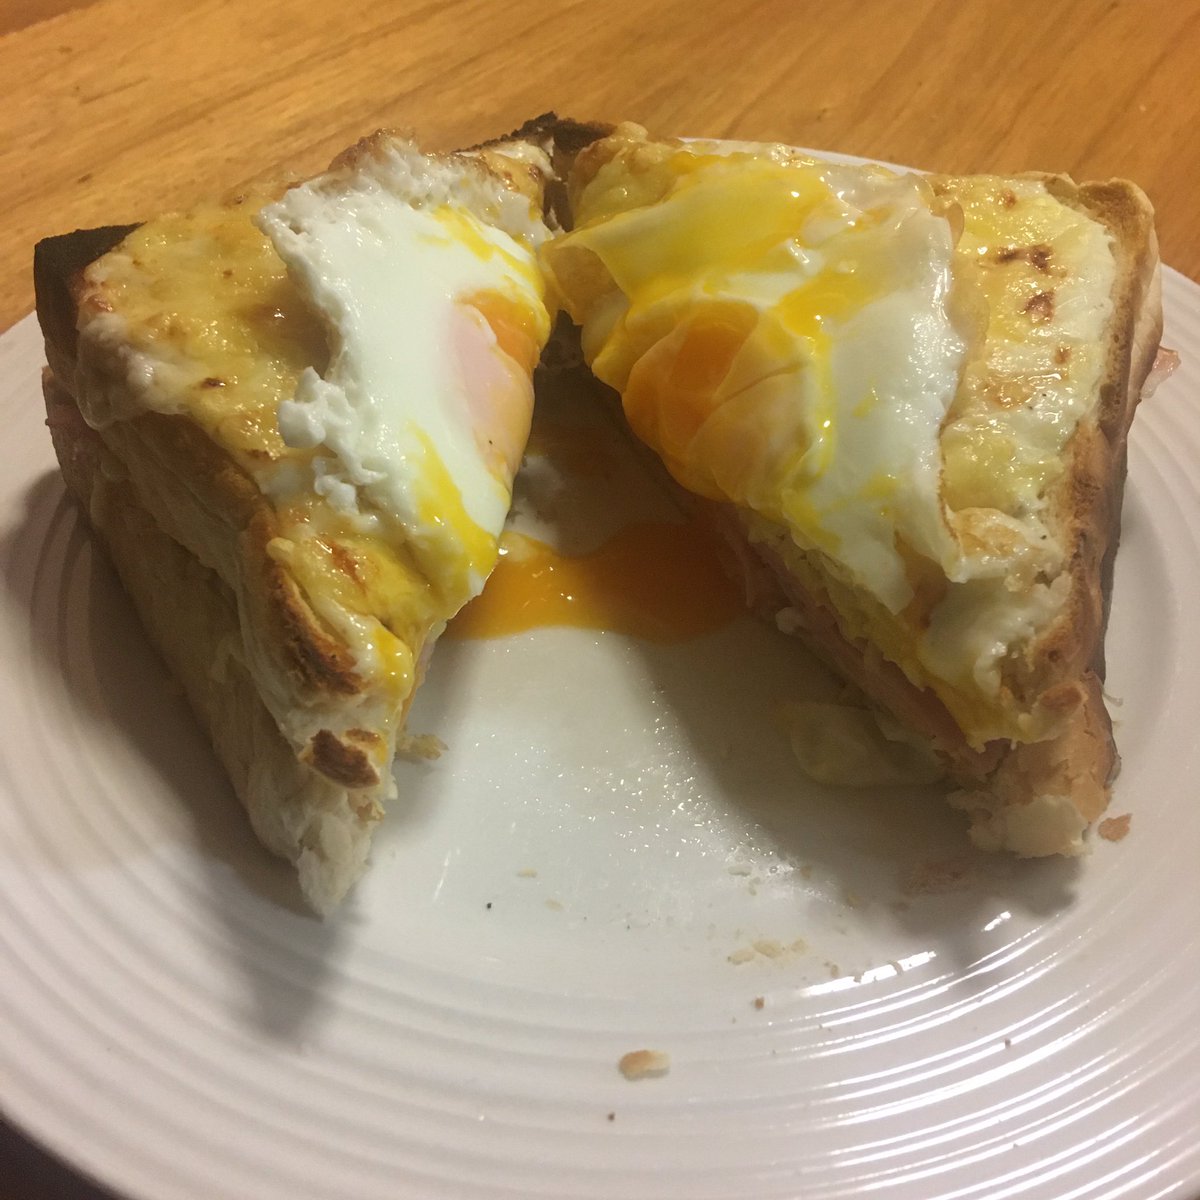 When #FromageFriday collides with #TourSanga night, we have Croque Madame for dinner #TourSnacks #CouchPeloton